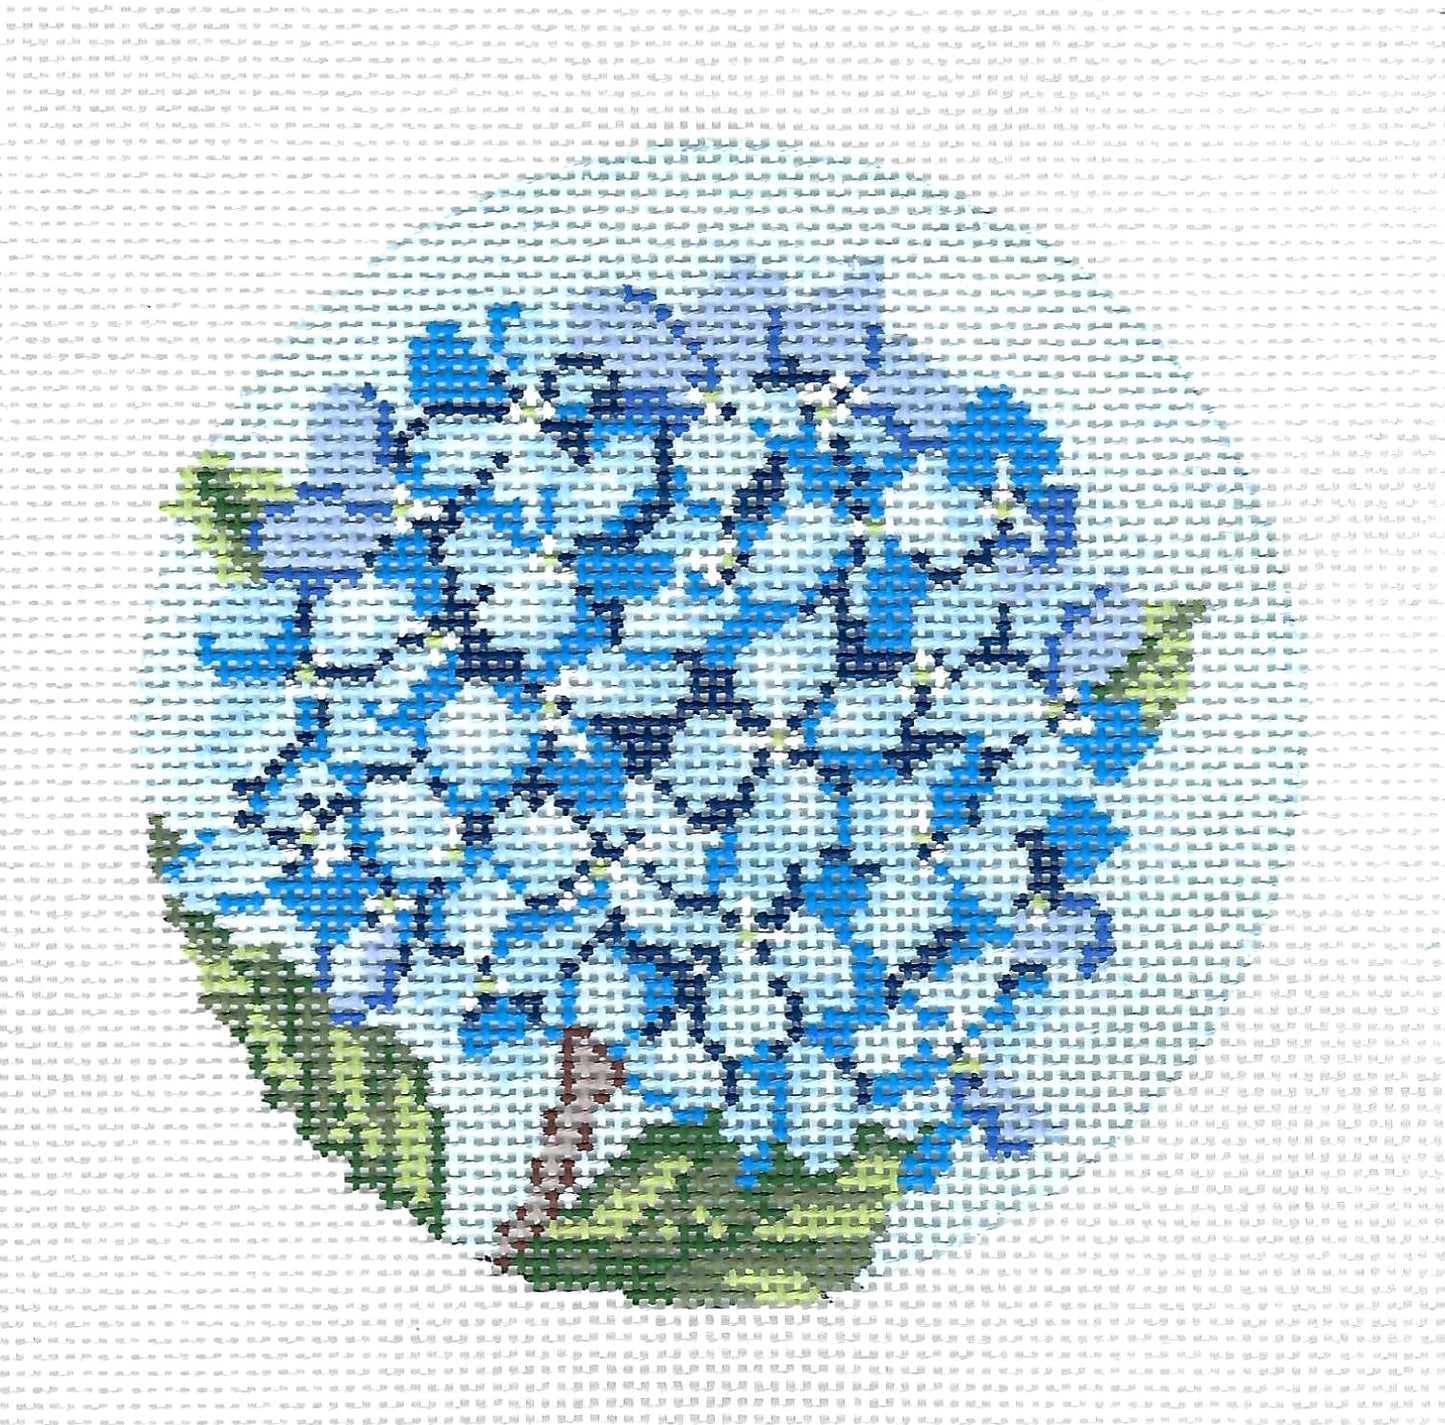 Blue Hydrangea 4" Round Ornament handpainted 18 Mesh Needlepoint Canvas by Needle Crossings